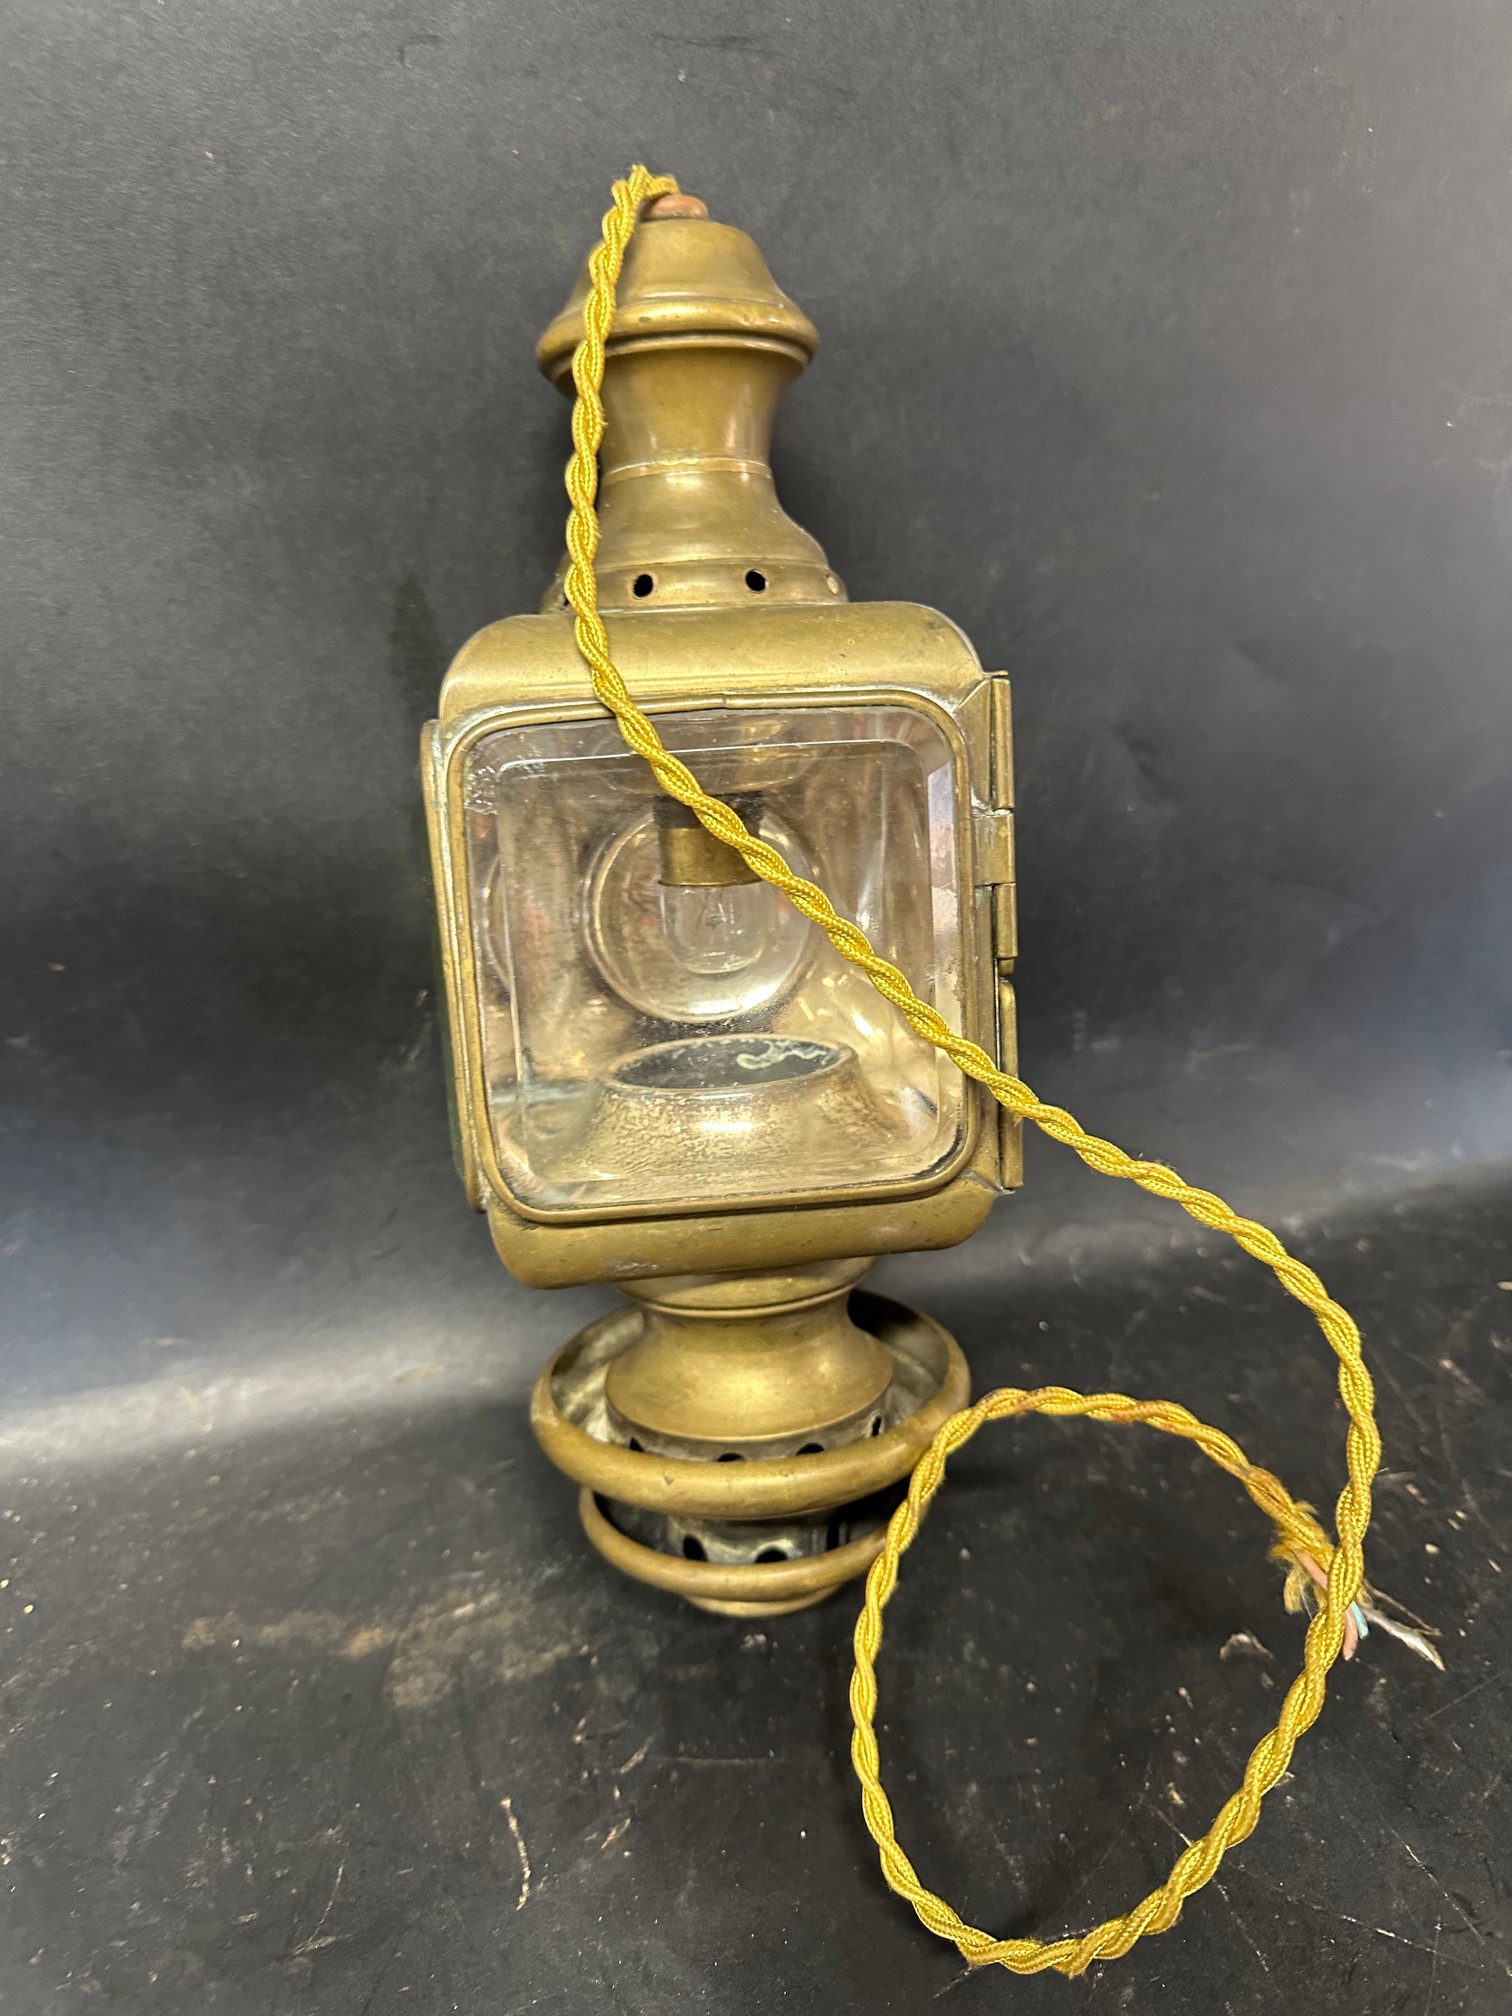 A Linx French coach lamp, converted for electric use. - Image 2 of 3